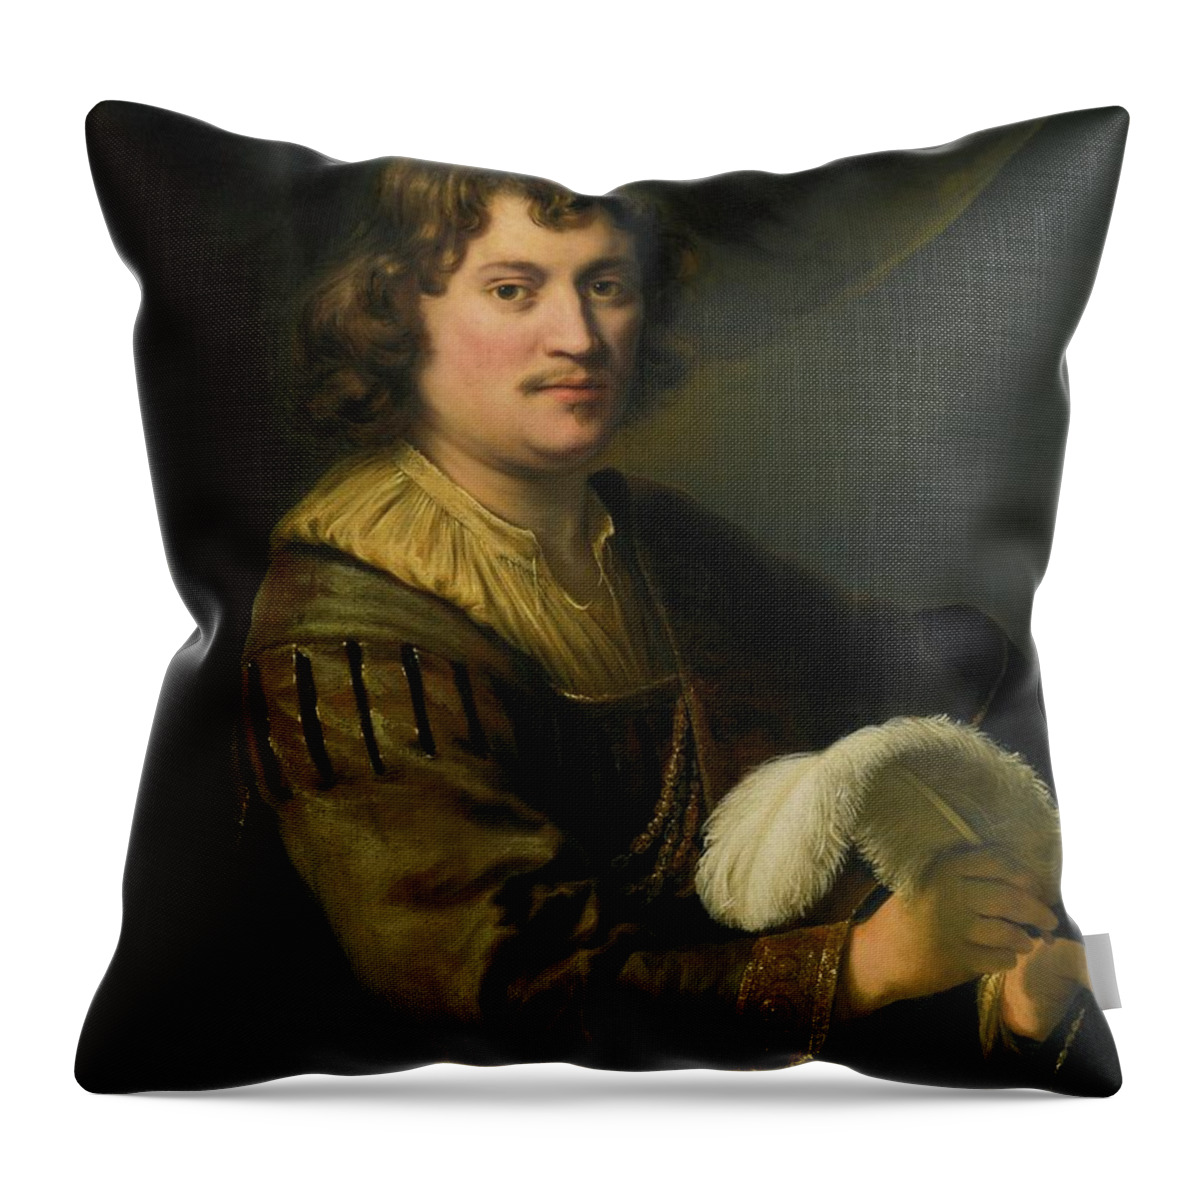 Ferdinand Bol Dordrecht 1616 - 1680 Amsterdam Portrait Of A Man Throw Pillow featuring the painting Portrait Of A Man by MotionAge Designs